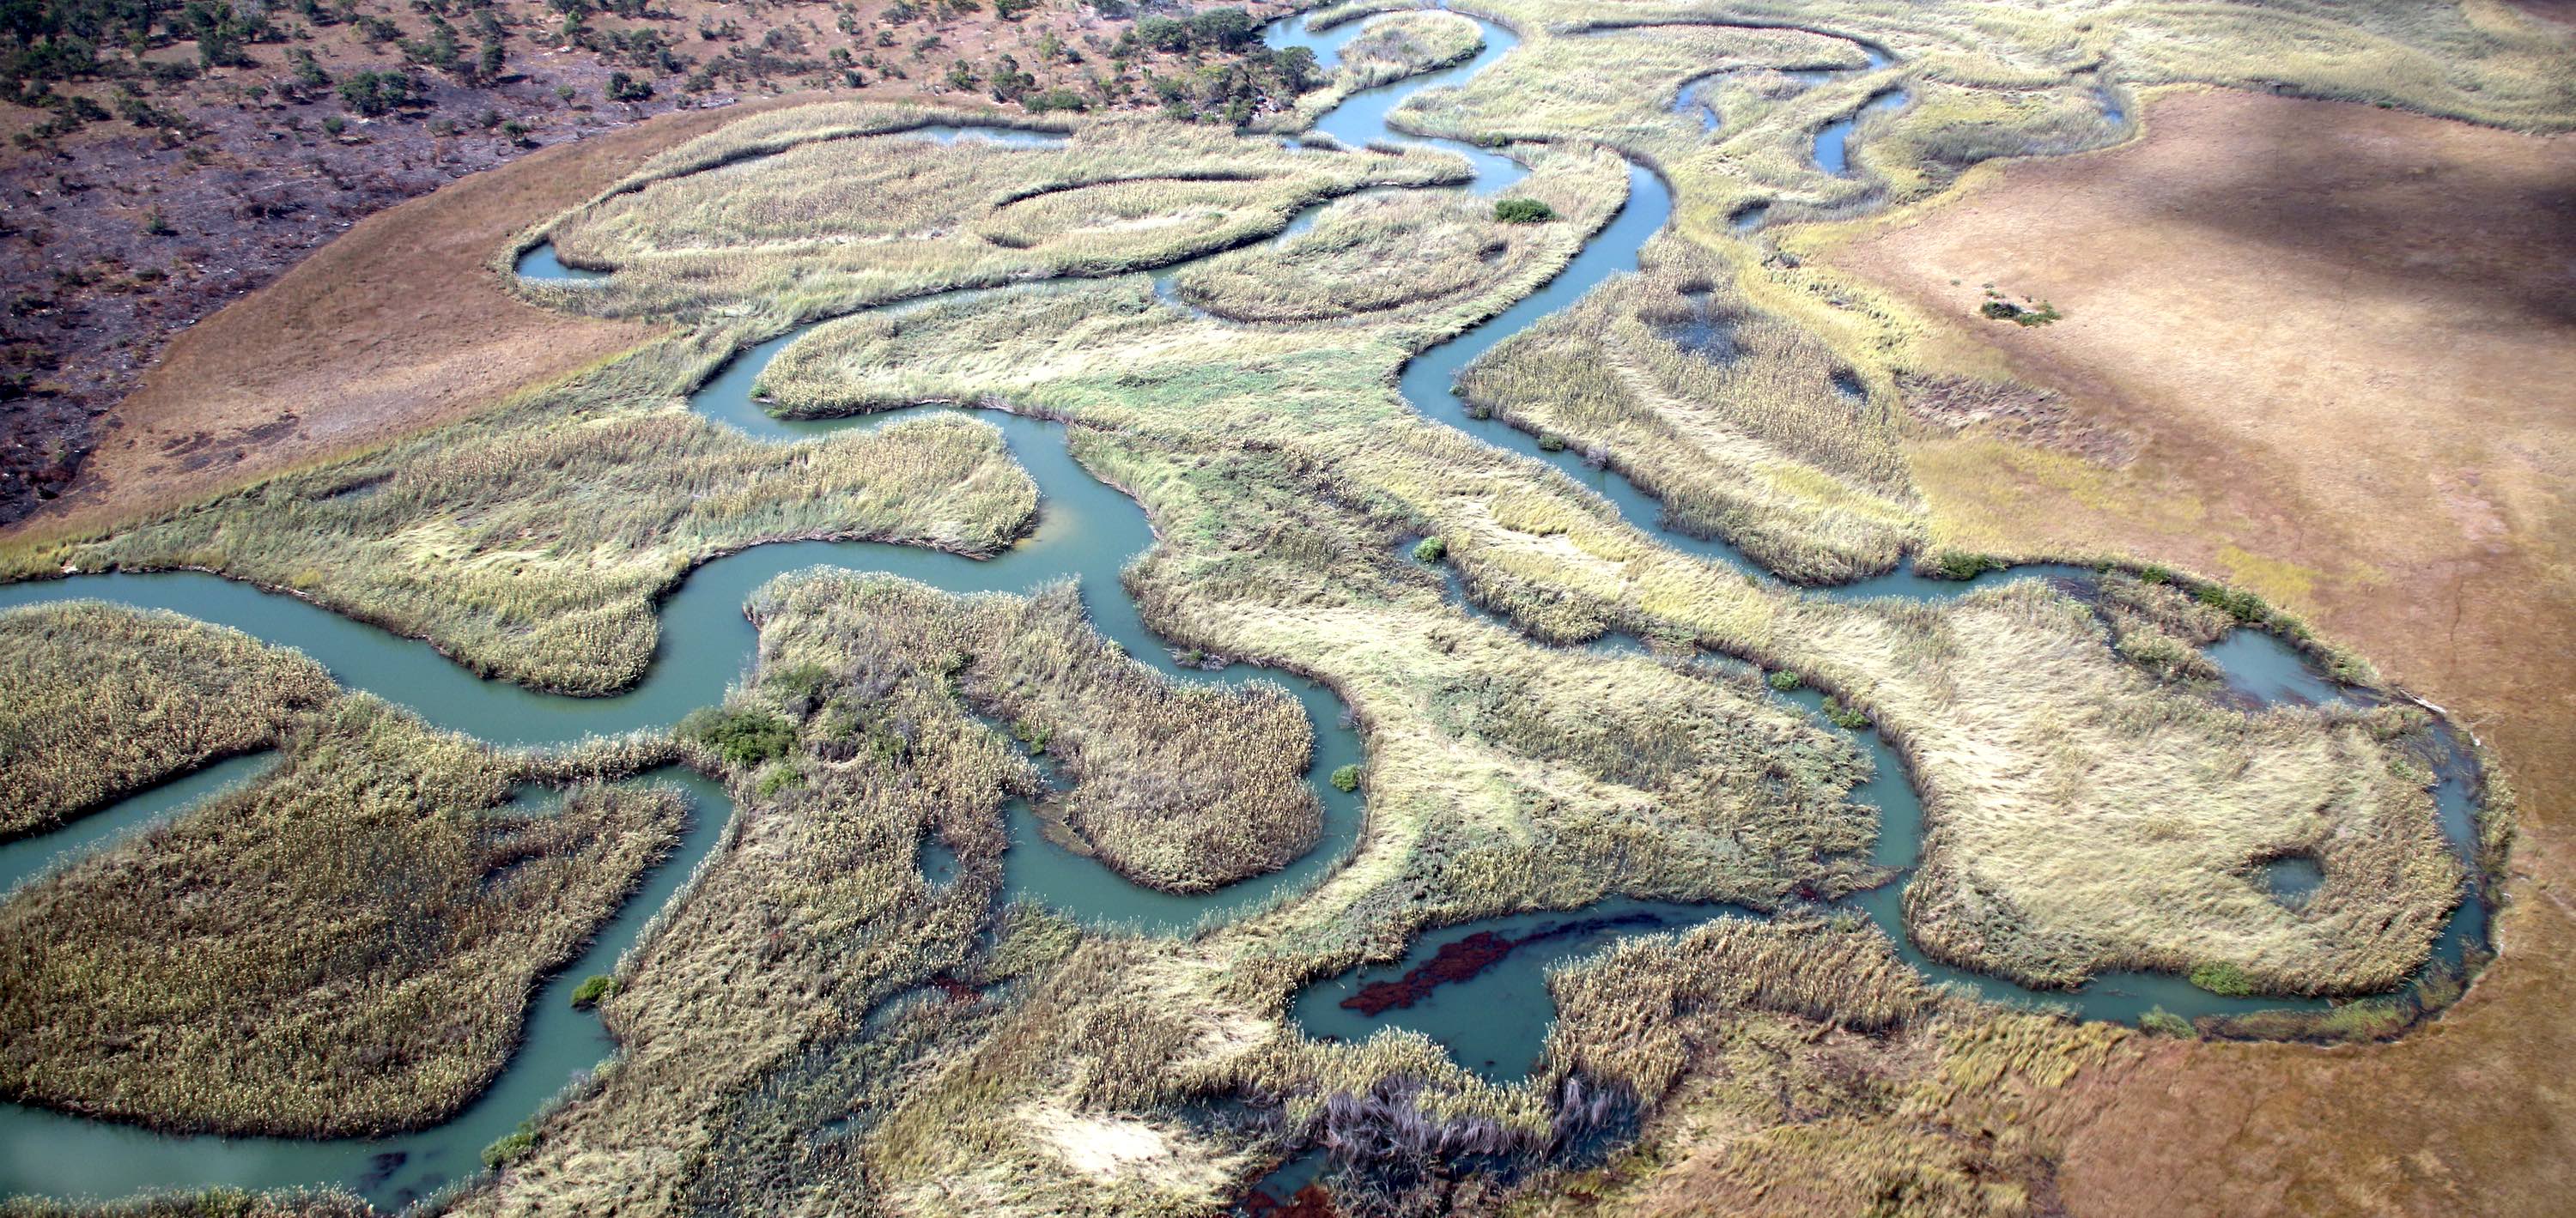 An aerial view of the Phragmites marshes on the Cutato Nganguela River.